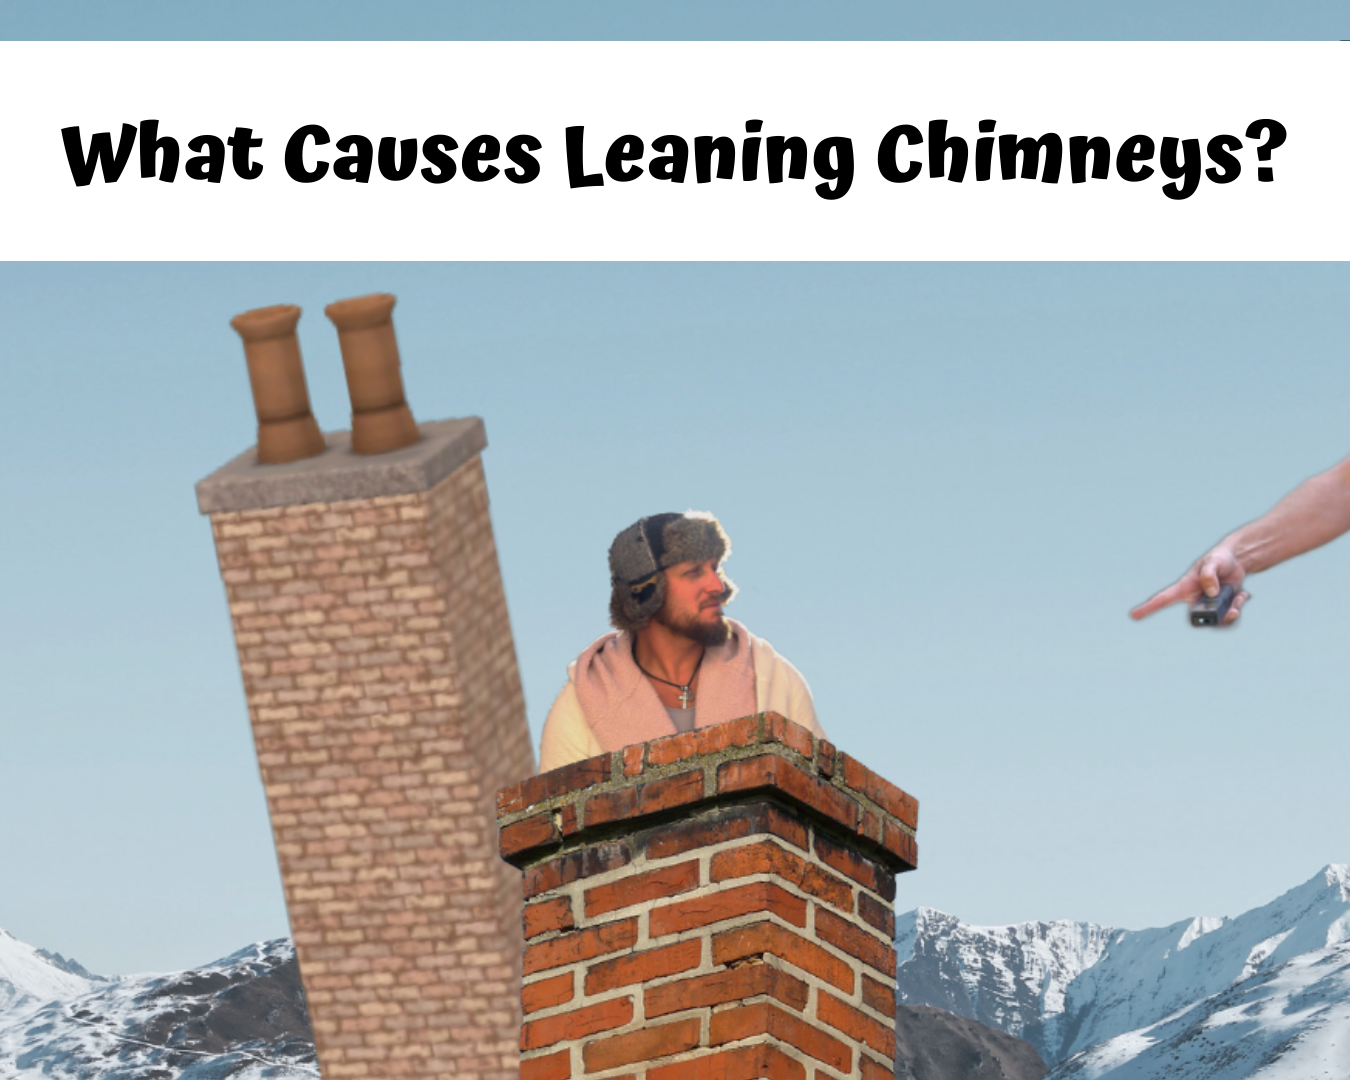 What Causes Leaning Chimneys?